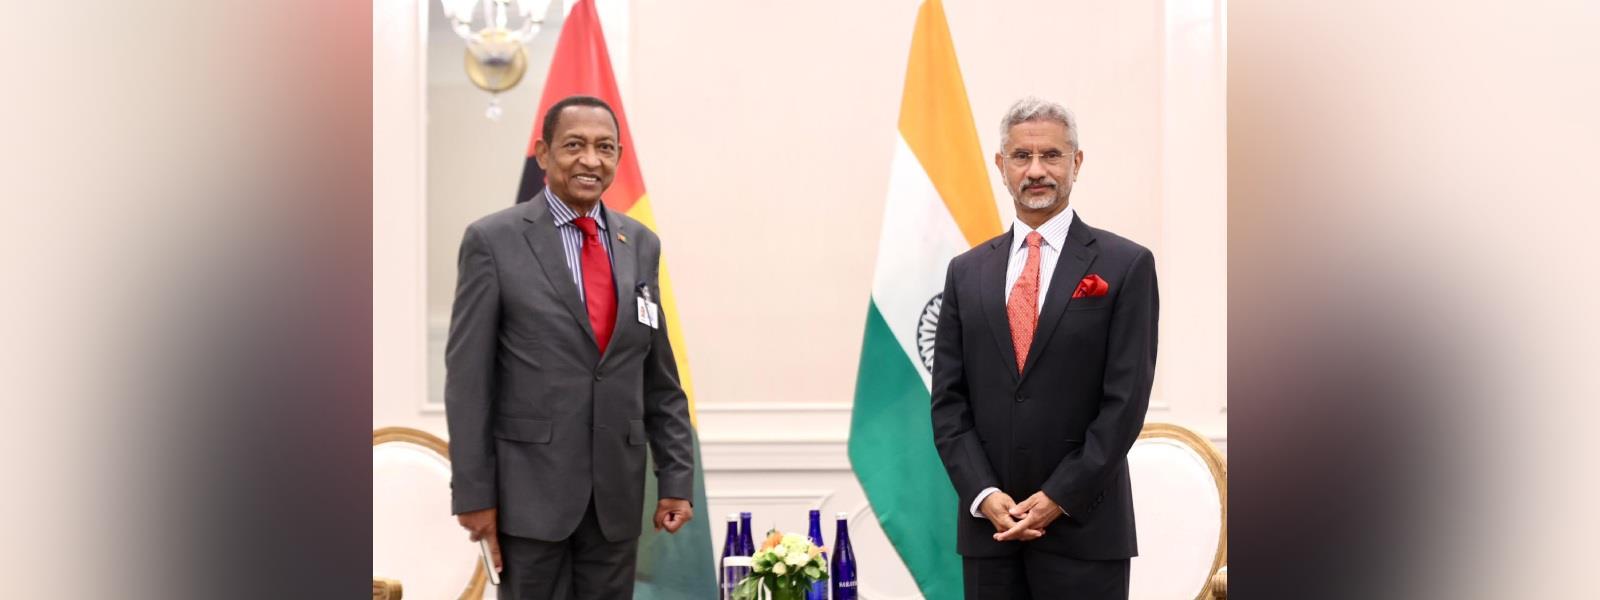 External Affairs Minister Dr. S. Jaishankar met H.E. Mr. Carlos Pereira, Foreign Minister of Guinea Bissau on the sidelines of 78th Session of the UNGA in New York